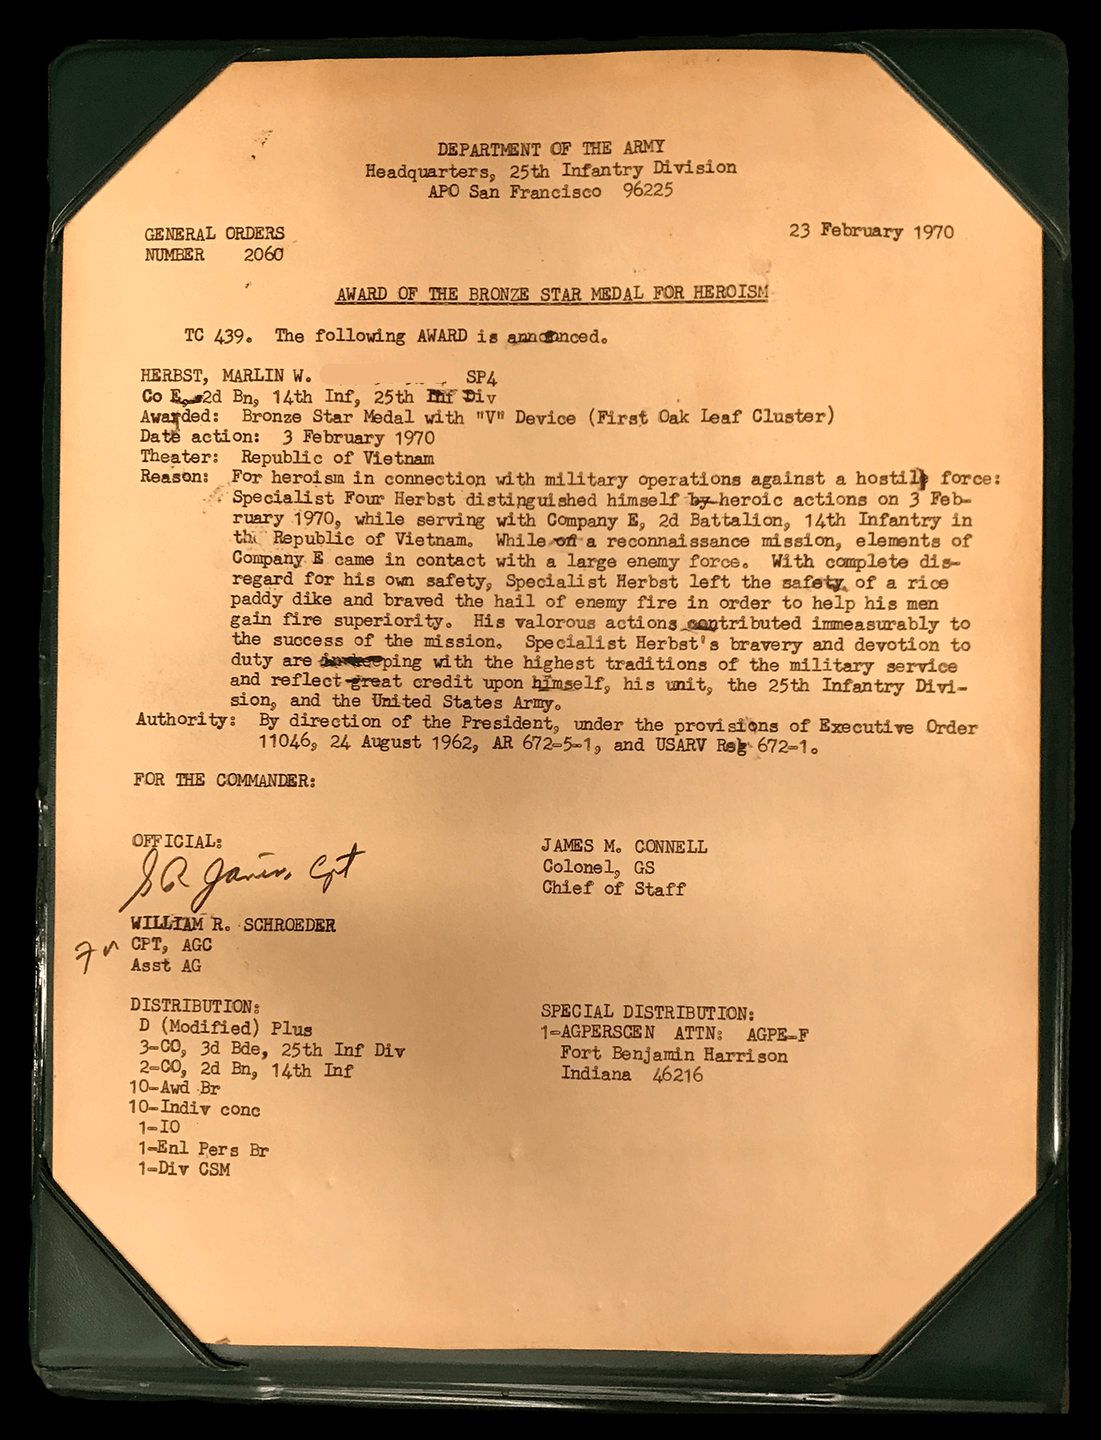 Citation for a Bronze Star, presented to Marlin Herbst for action on 2-3-1970.